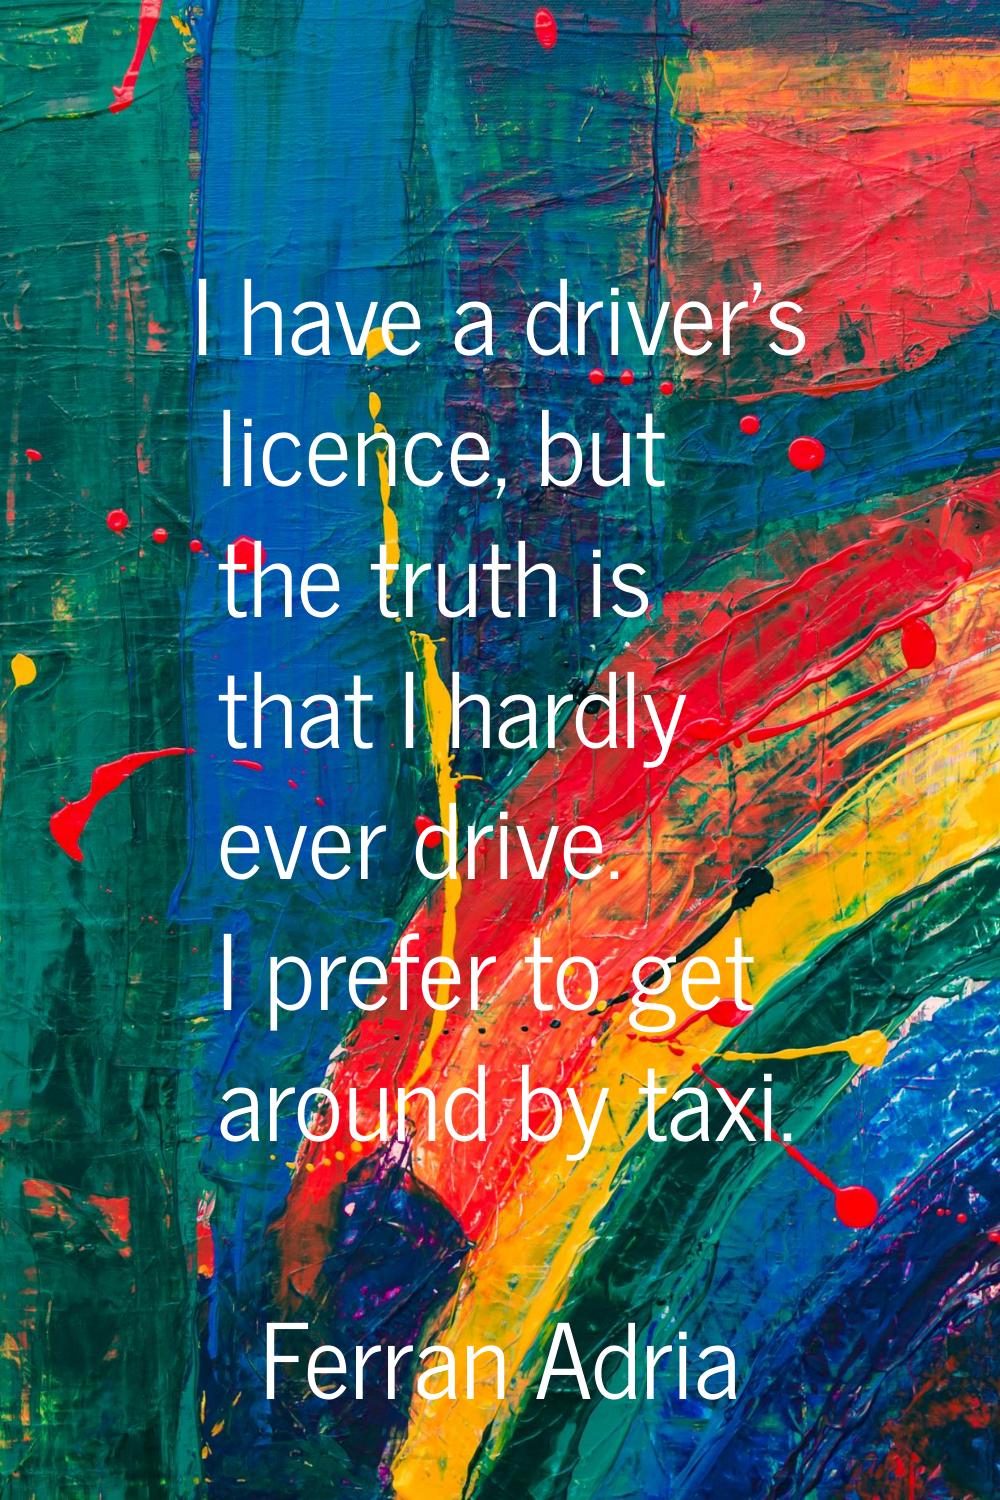 I have a driver's licence, but the truth is that I hardly ever drive. I prefer to get around by tax